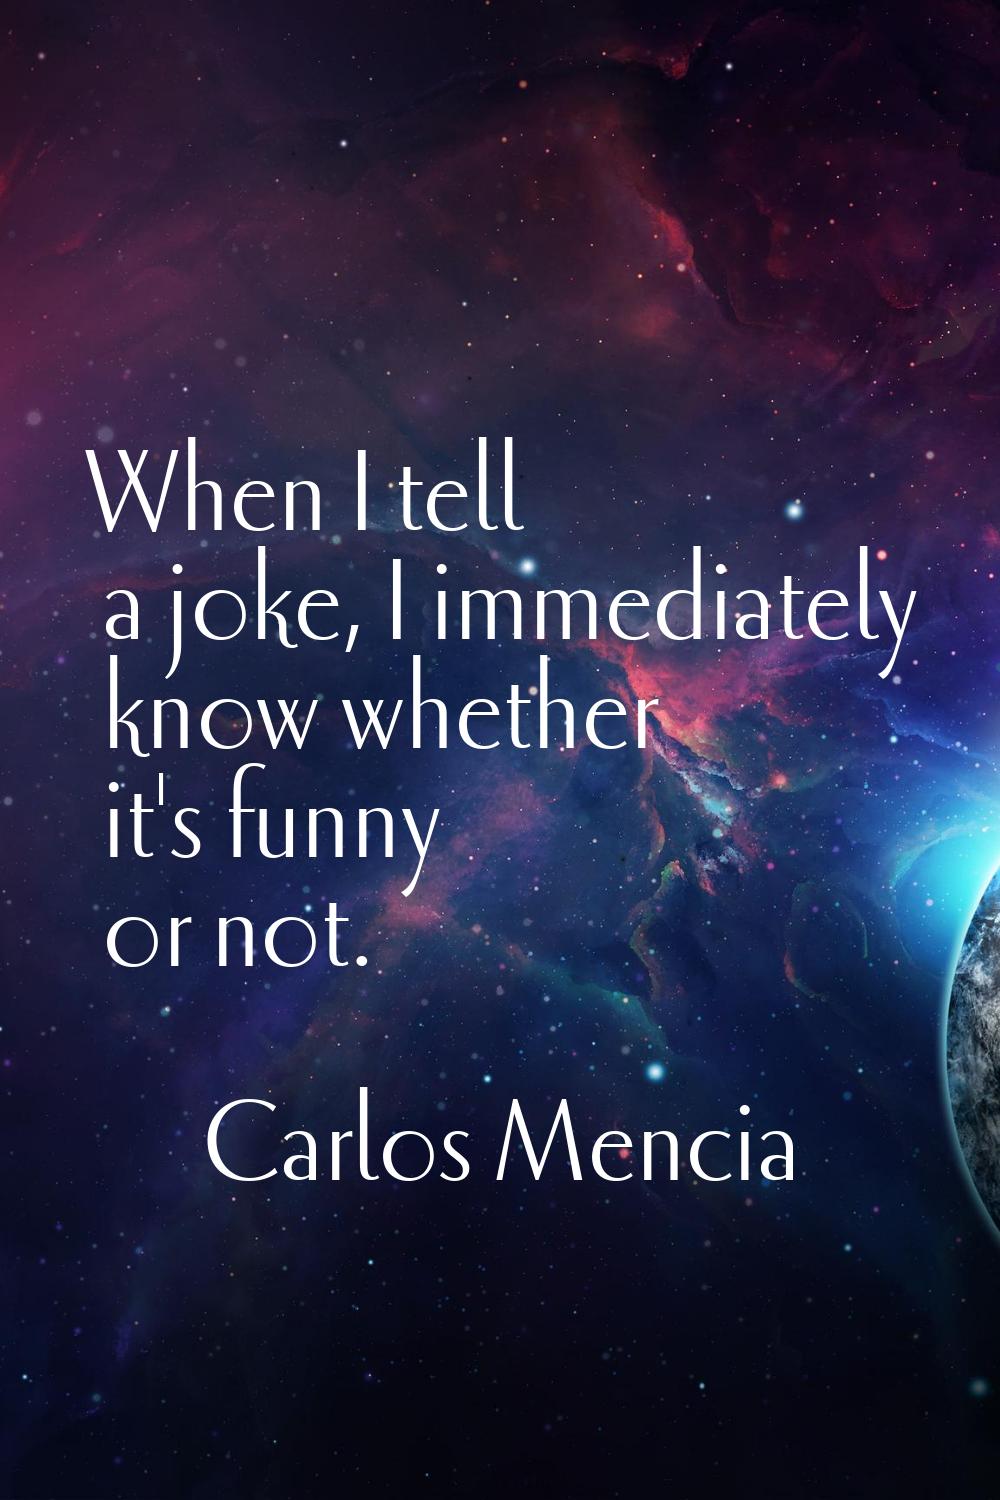 When I tell a joke, I immediately know whether it's funny or not.